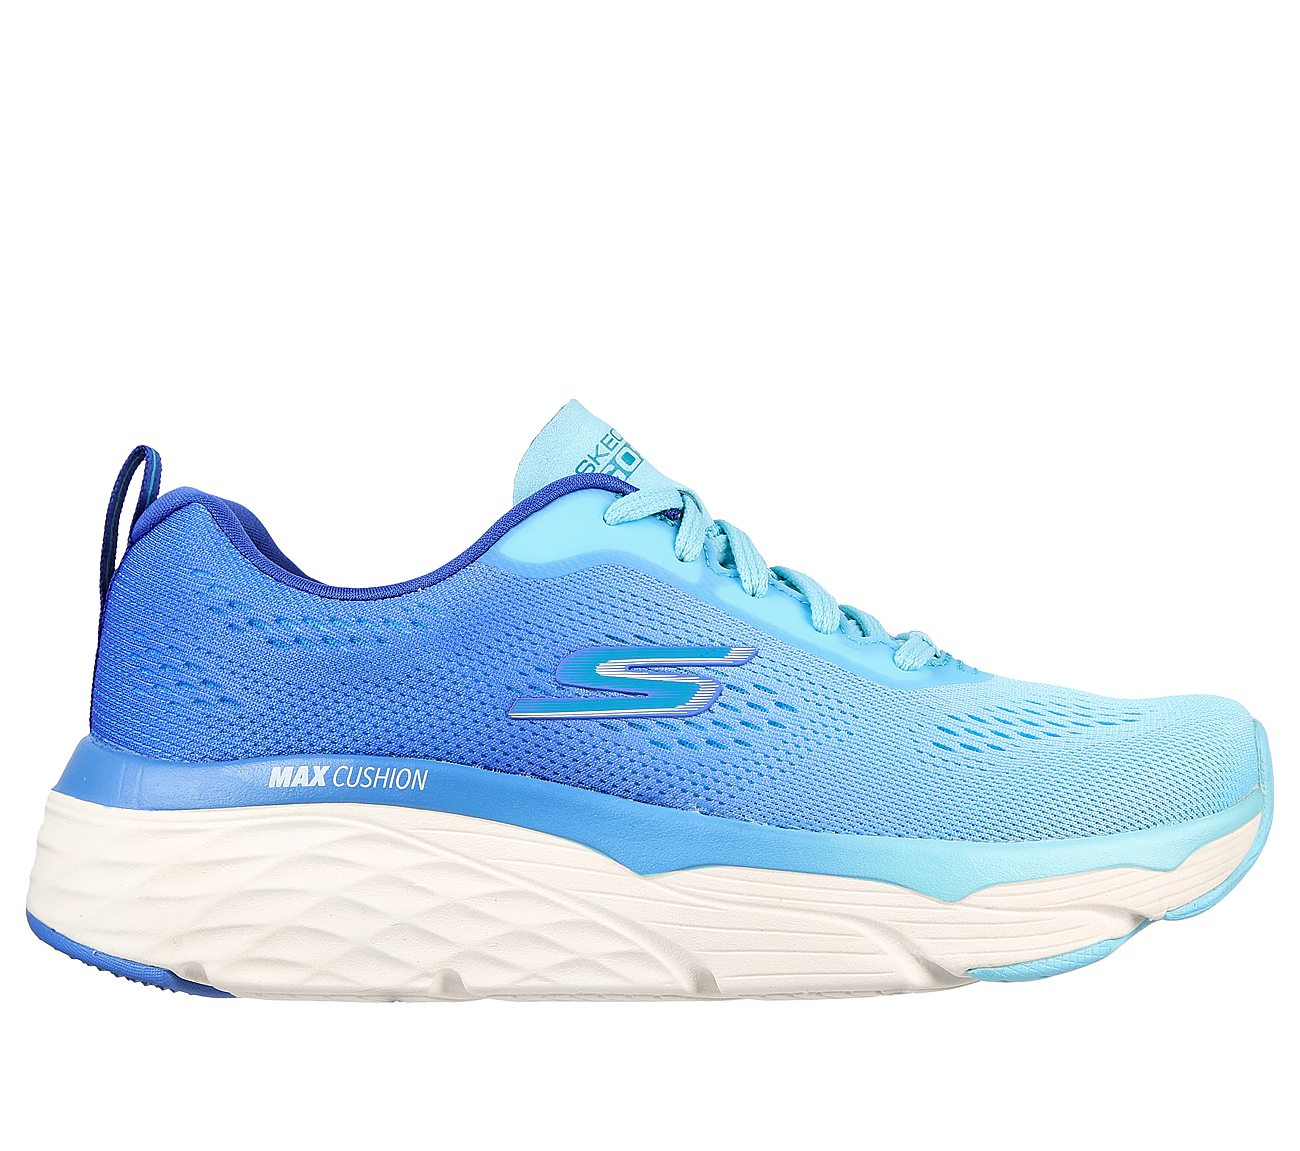 skechers max cushioning tennis shoes OFF 63%